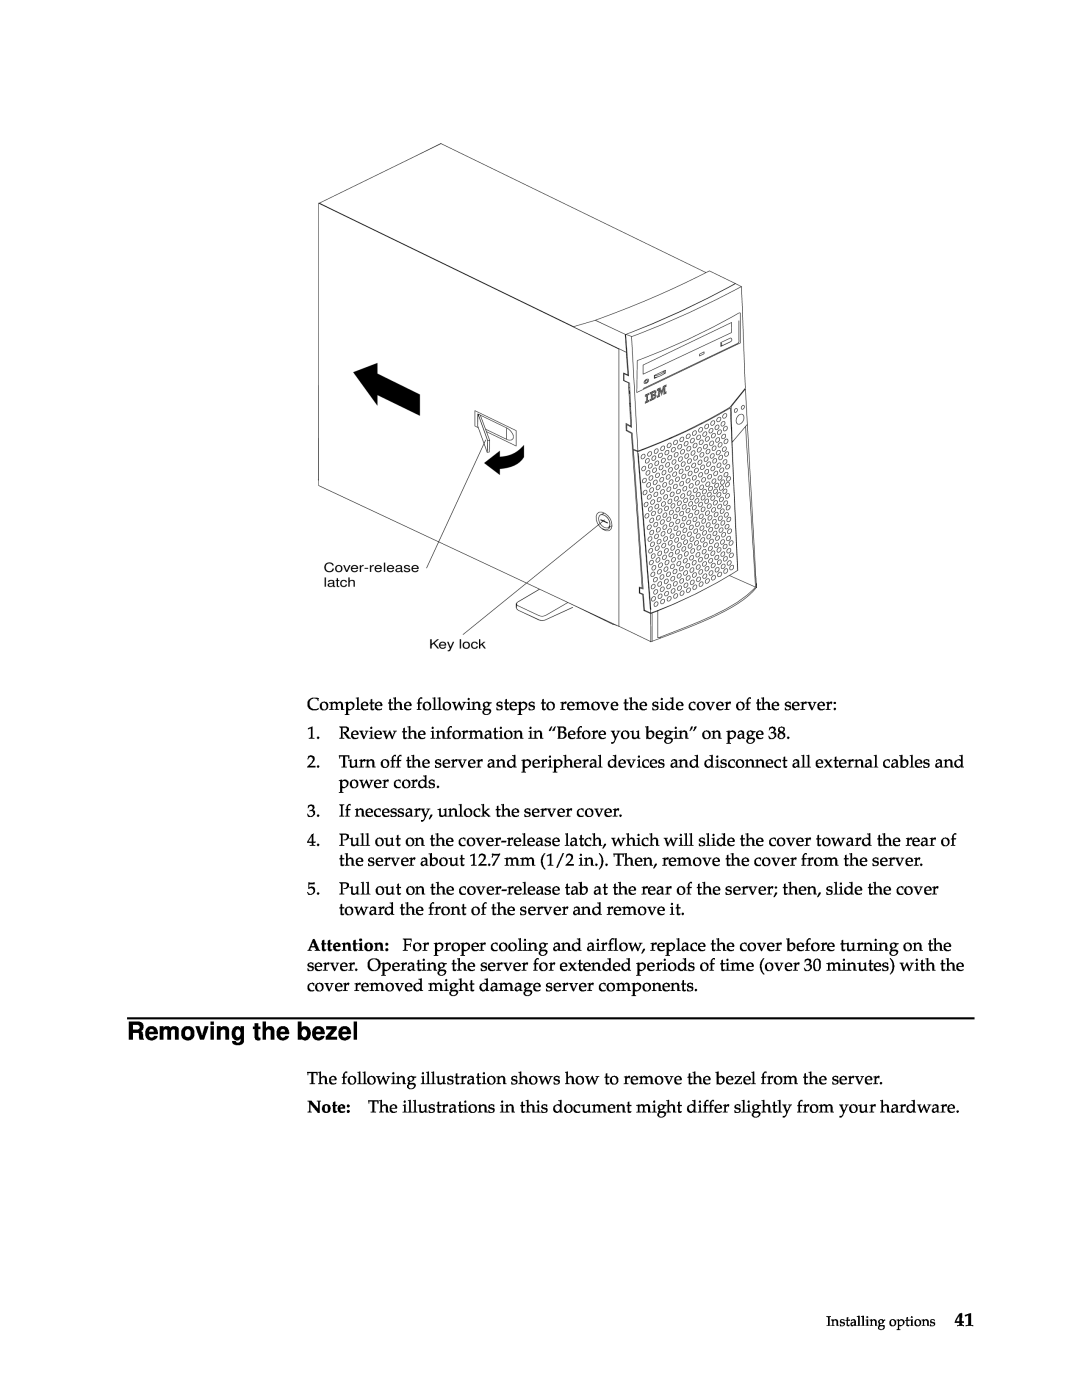 IBM x Series 200 manual Removing the bezel, Cover-release latch Key lock 